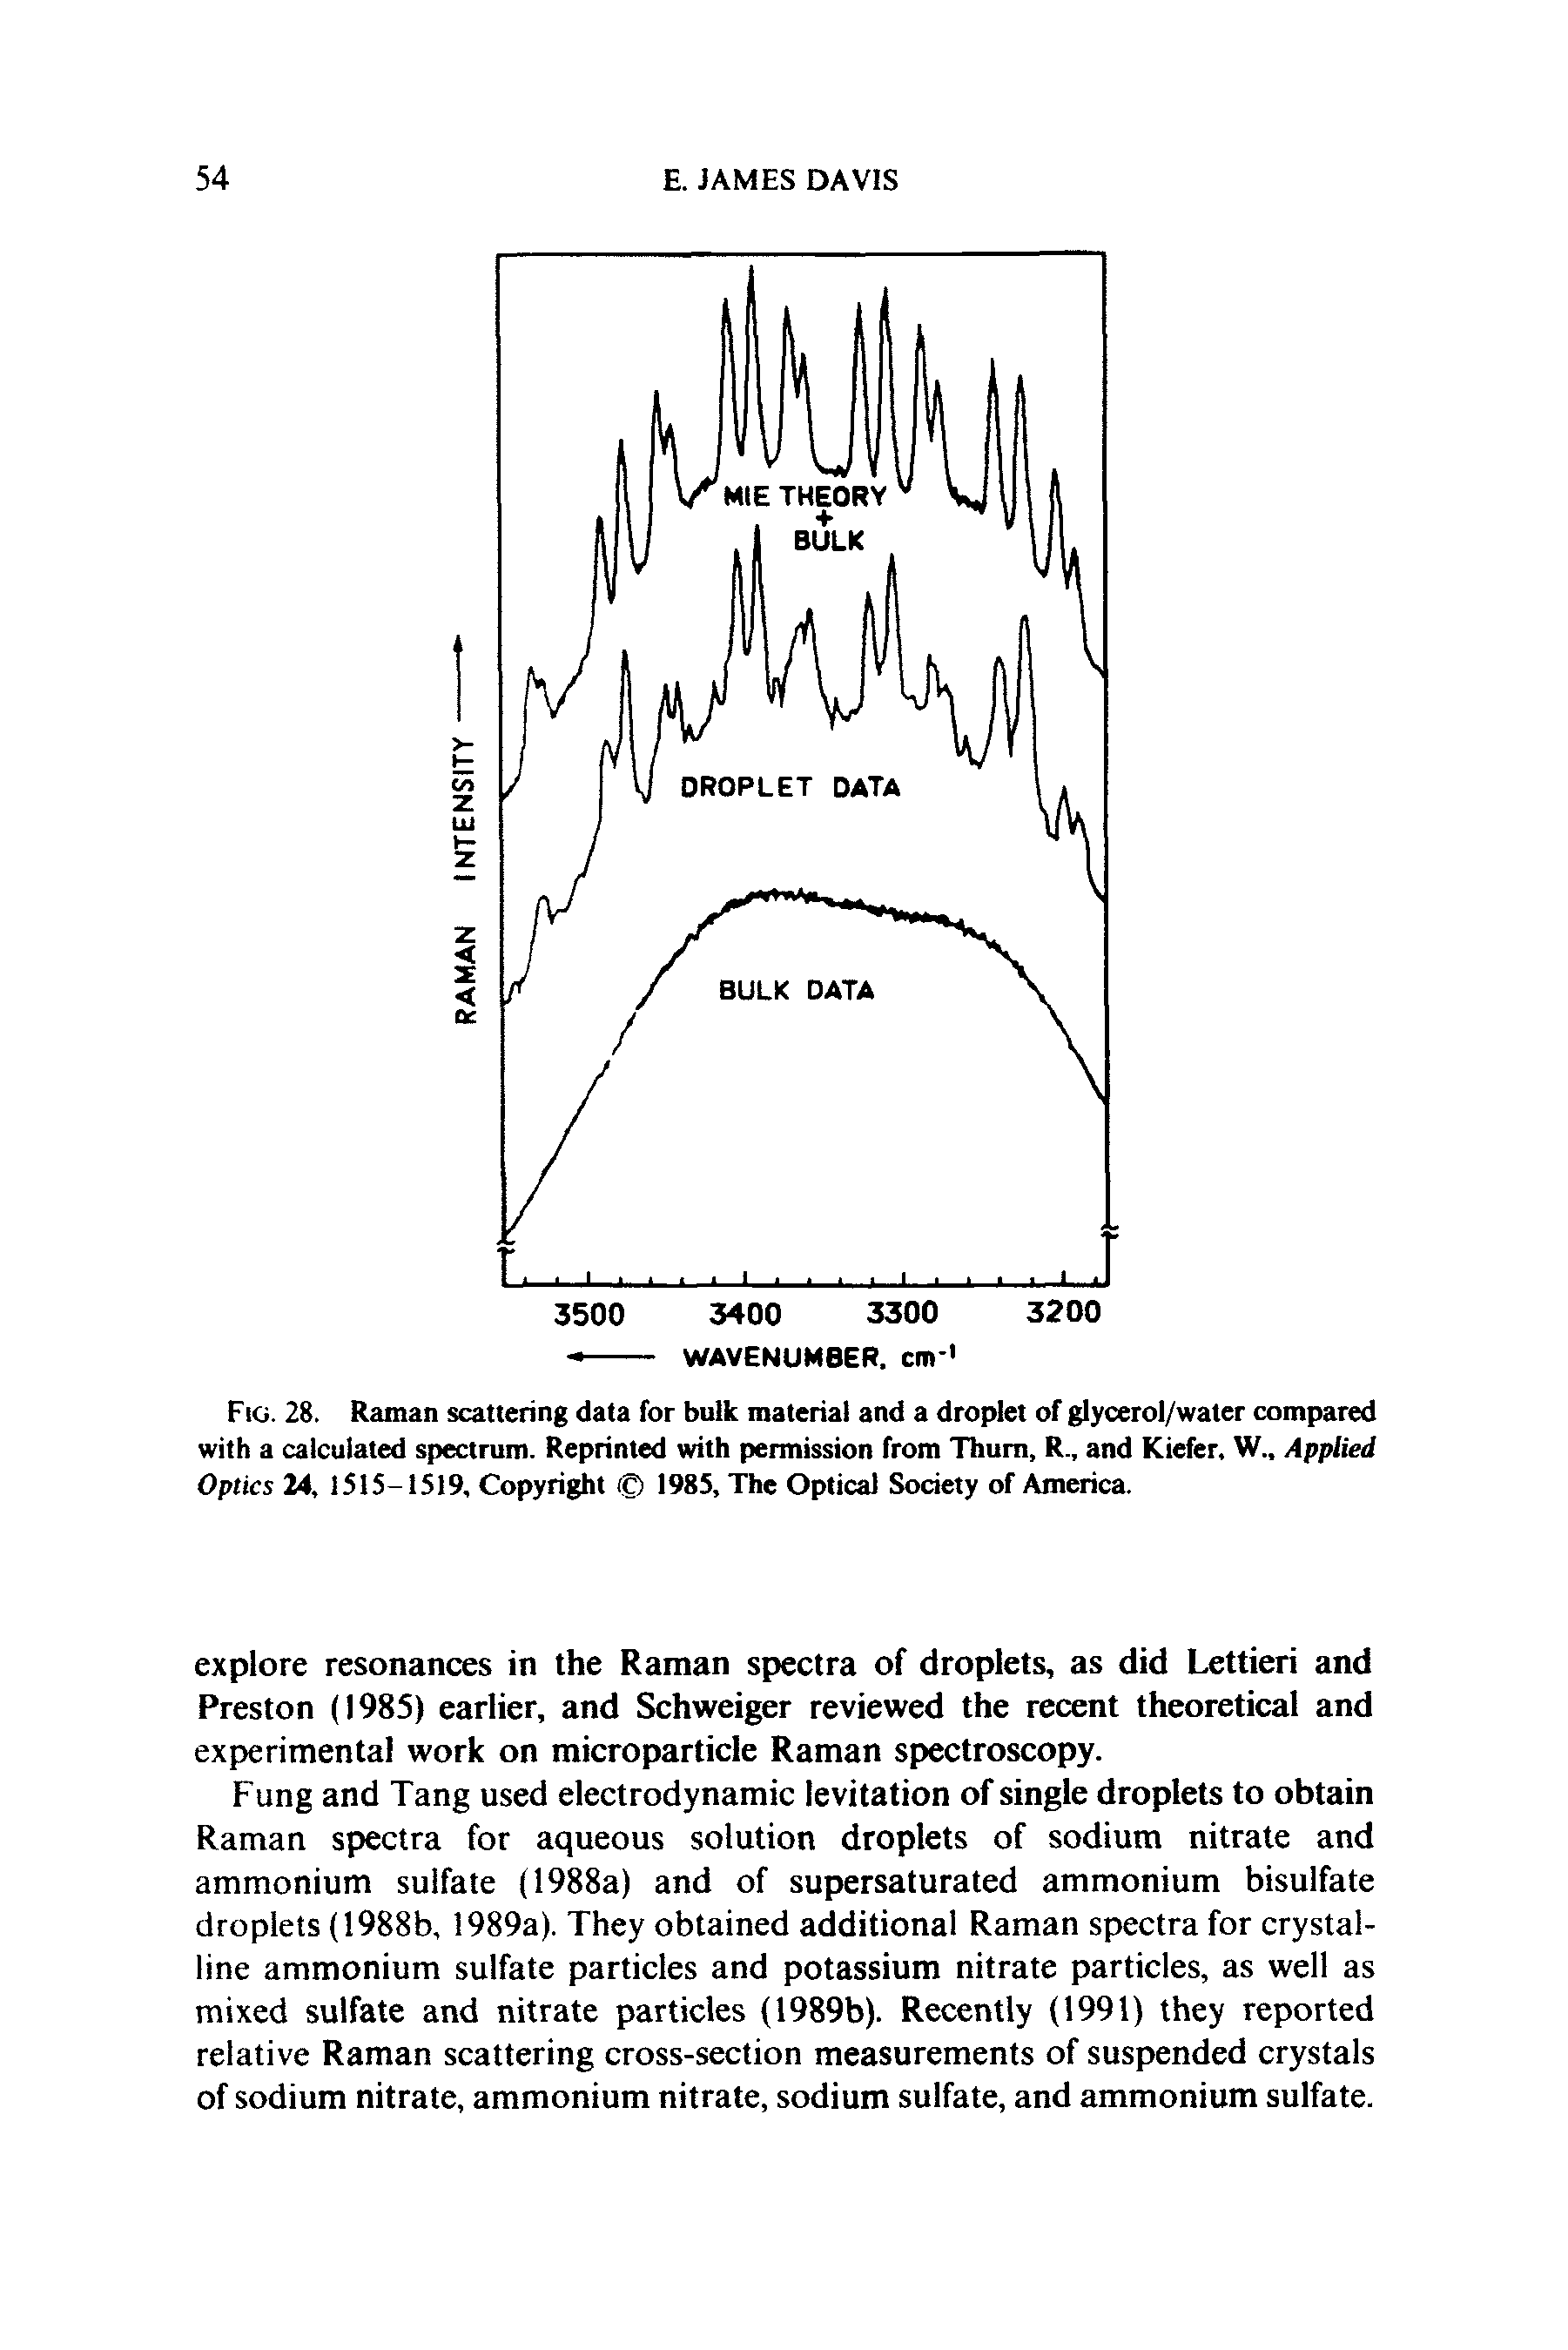 Fig. 28. Raman scattering data for bulk material and a droplet of glycerol/water compared with a calculated spectrum. Reprinted with permission from Thum, R., and Kiefer, W.. Applied Optics 24, 1515-1519, Copyright 1985, The Optical Society of America.